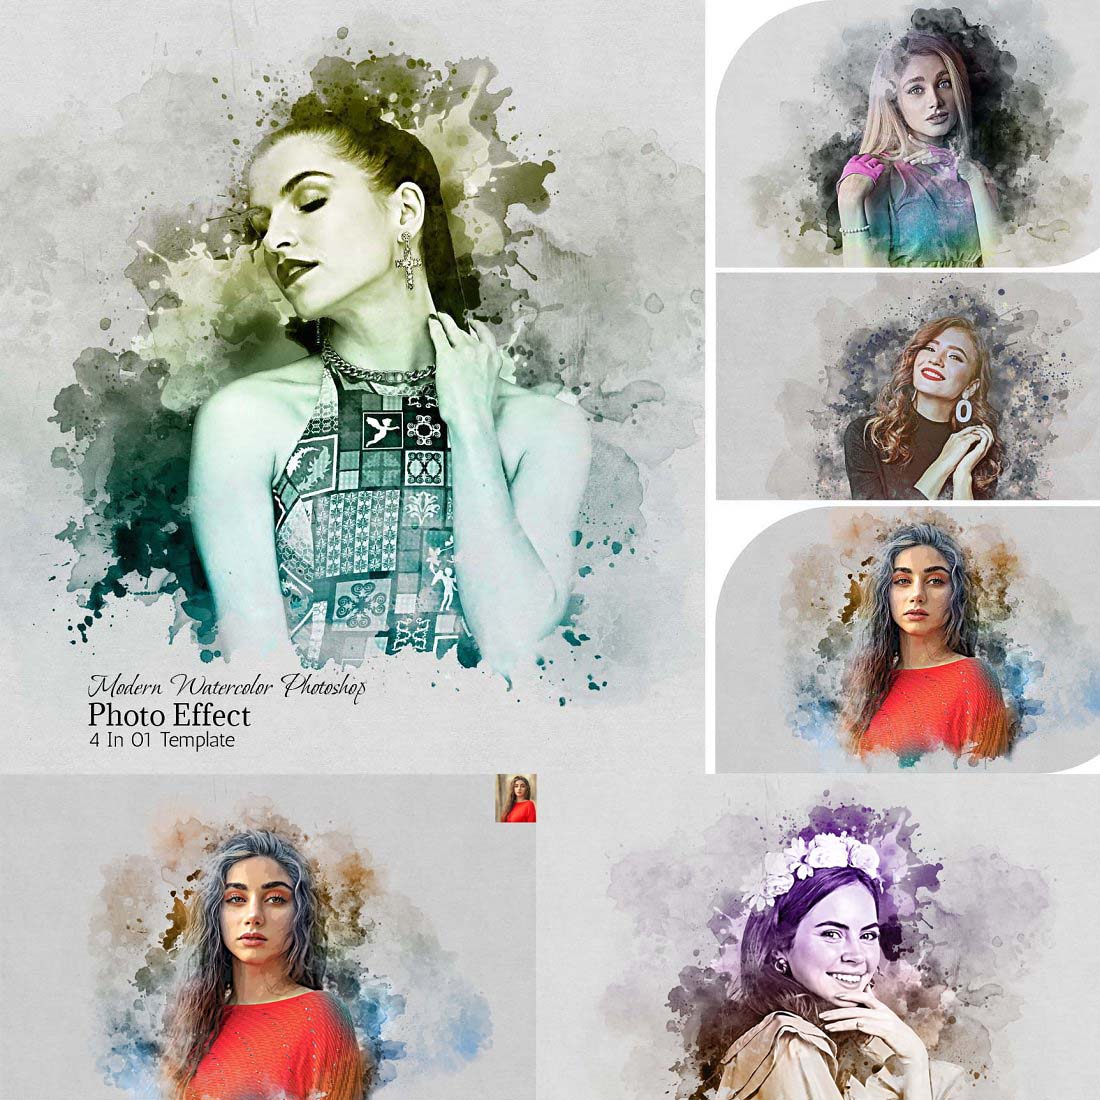 Modern Watercolor Photoshop Effect cover image.